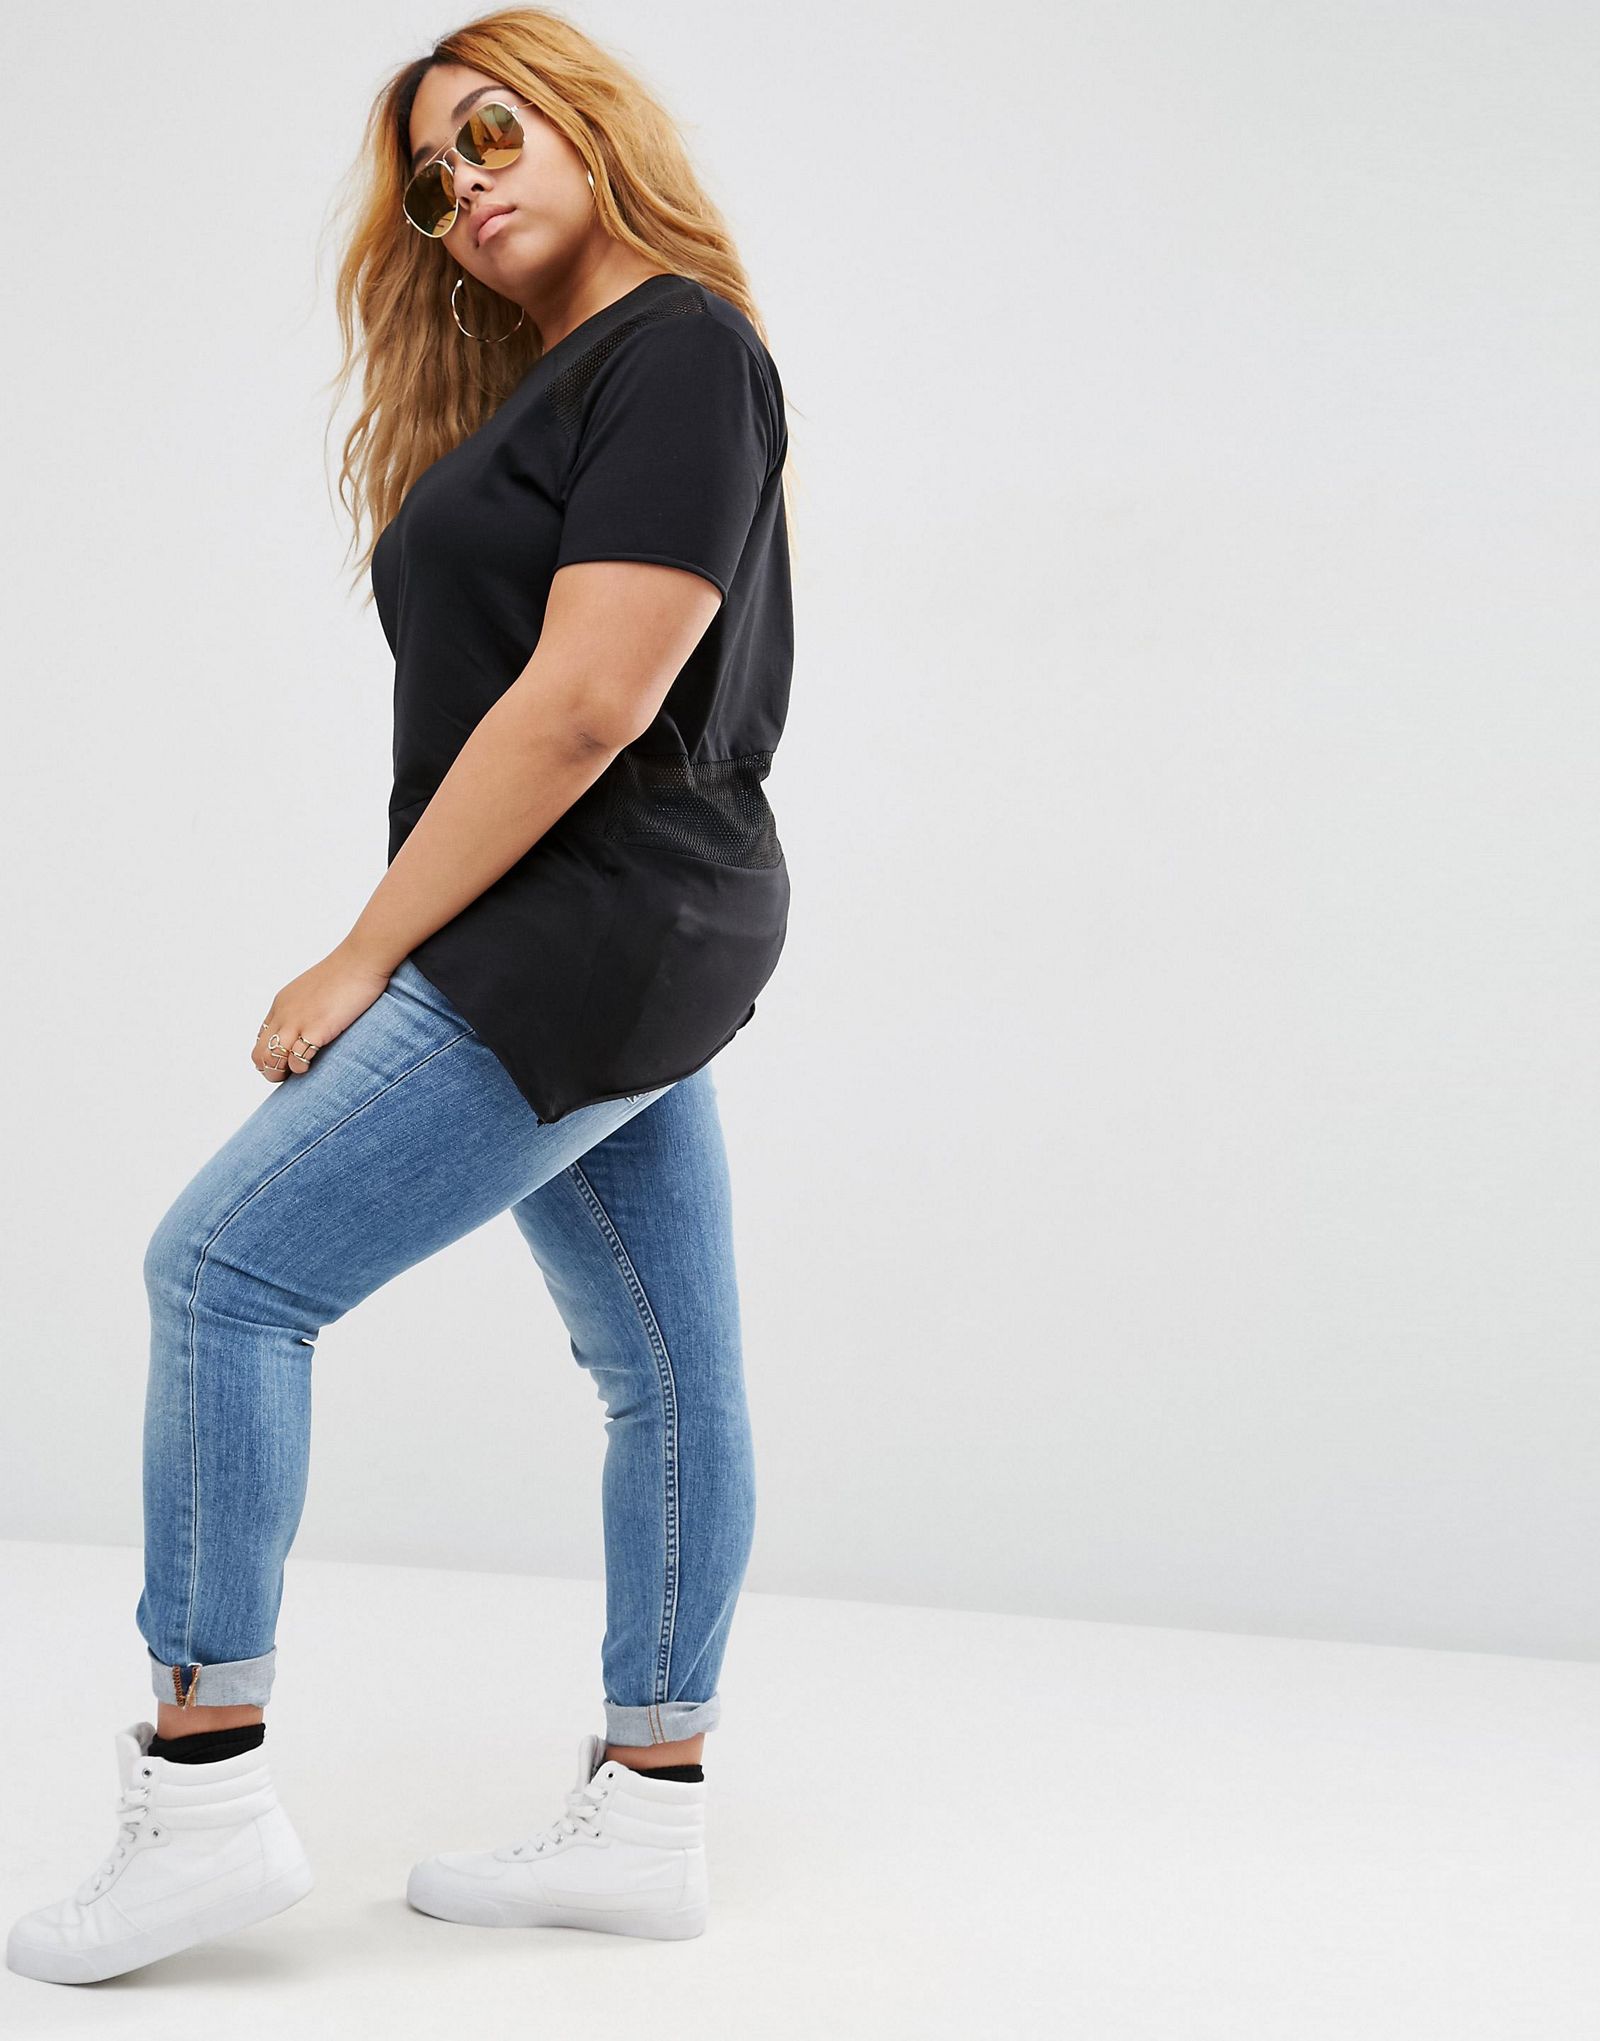 ASOS CURVE Asymmetric T-Shirt with Mesh Inserts